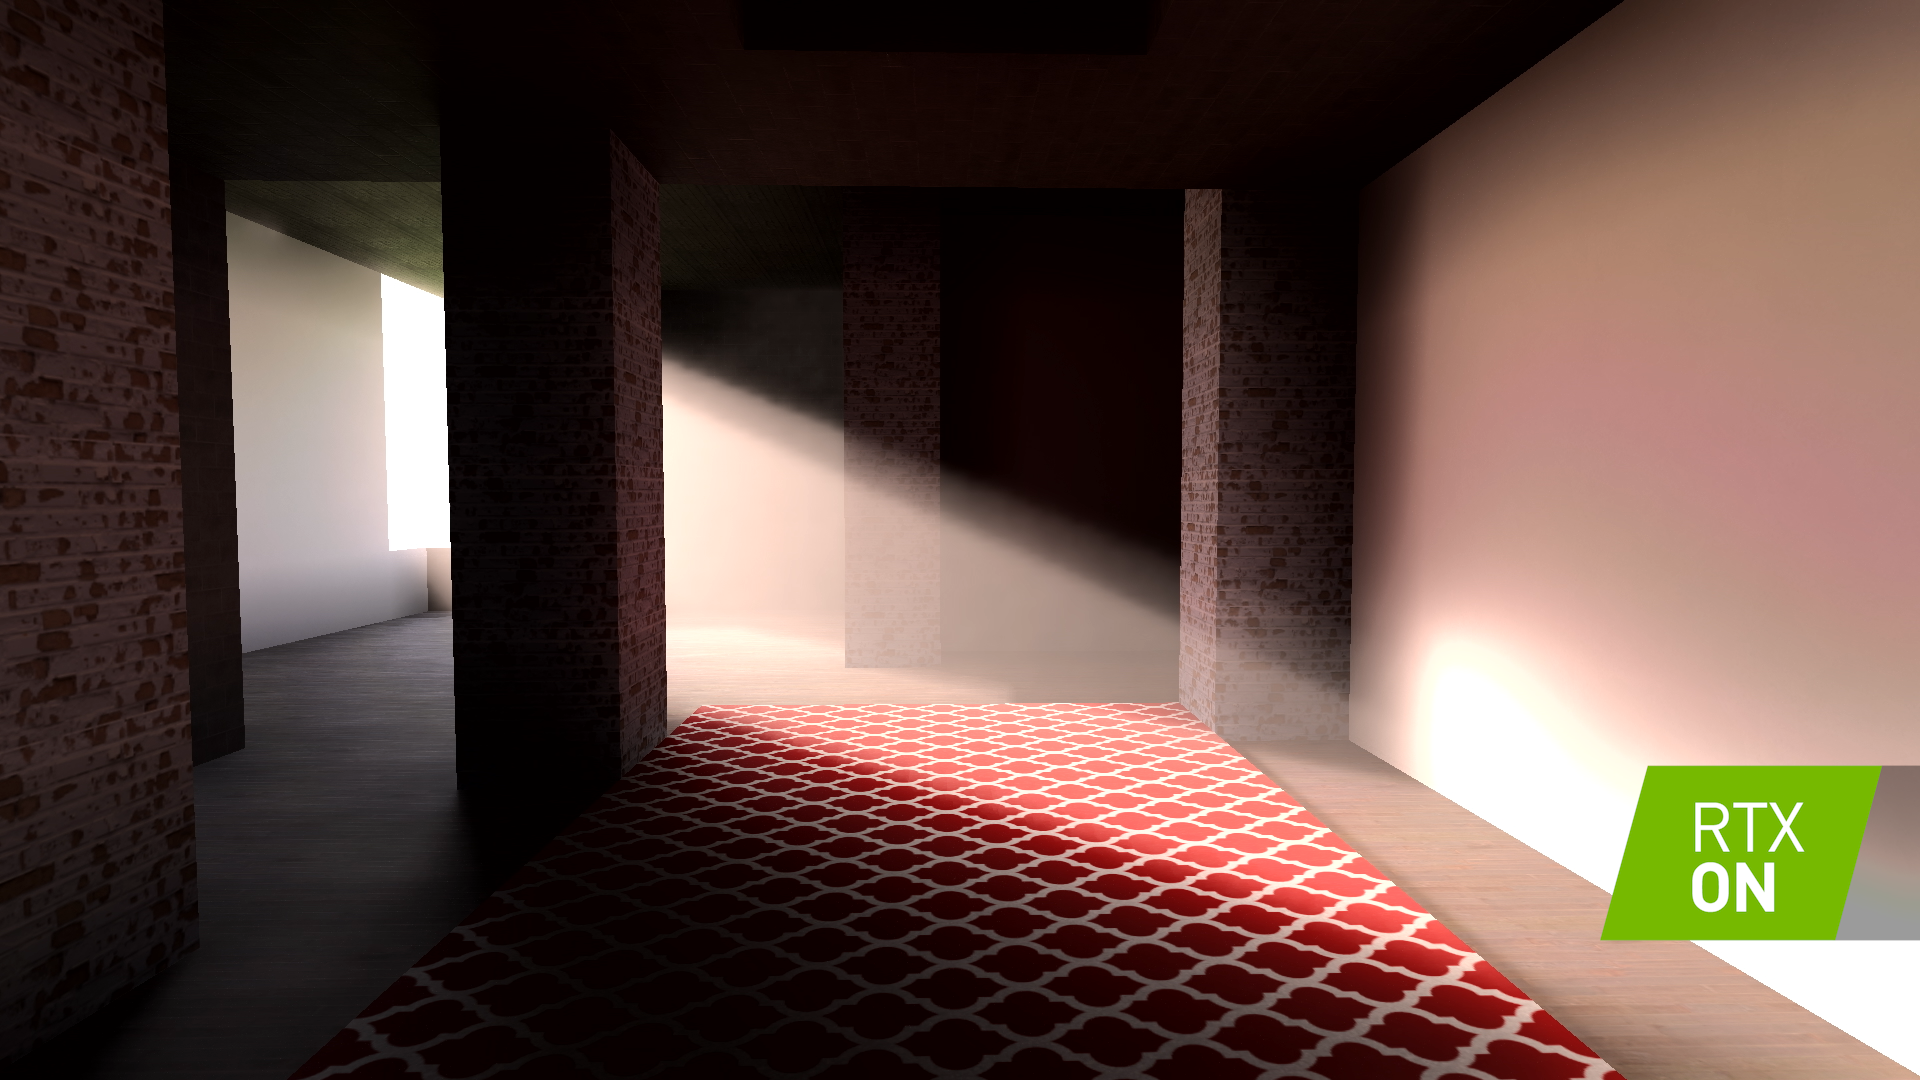 The Best Ray Tracing Shaders For 1.19!